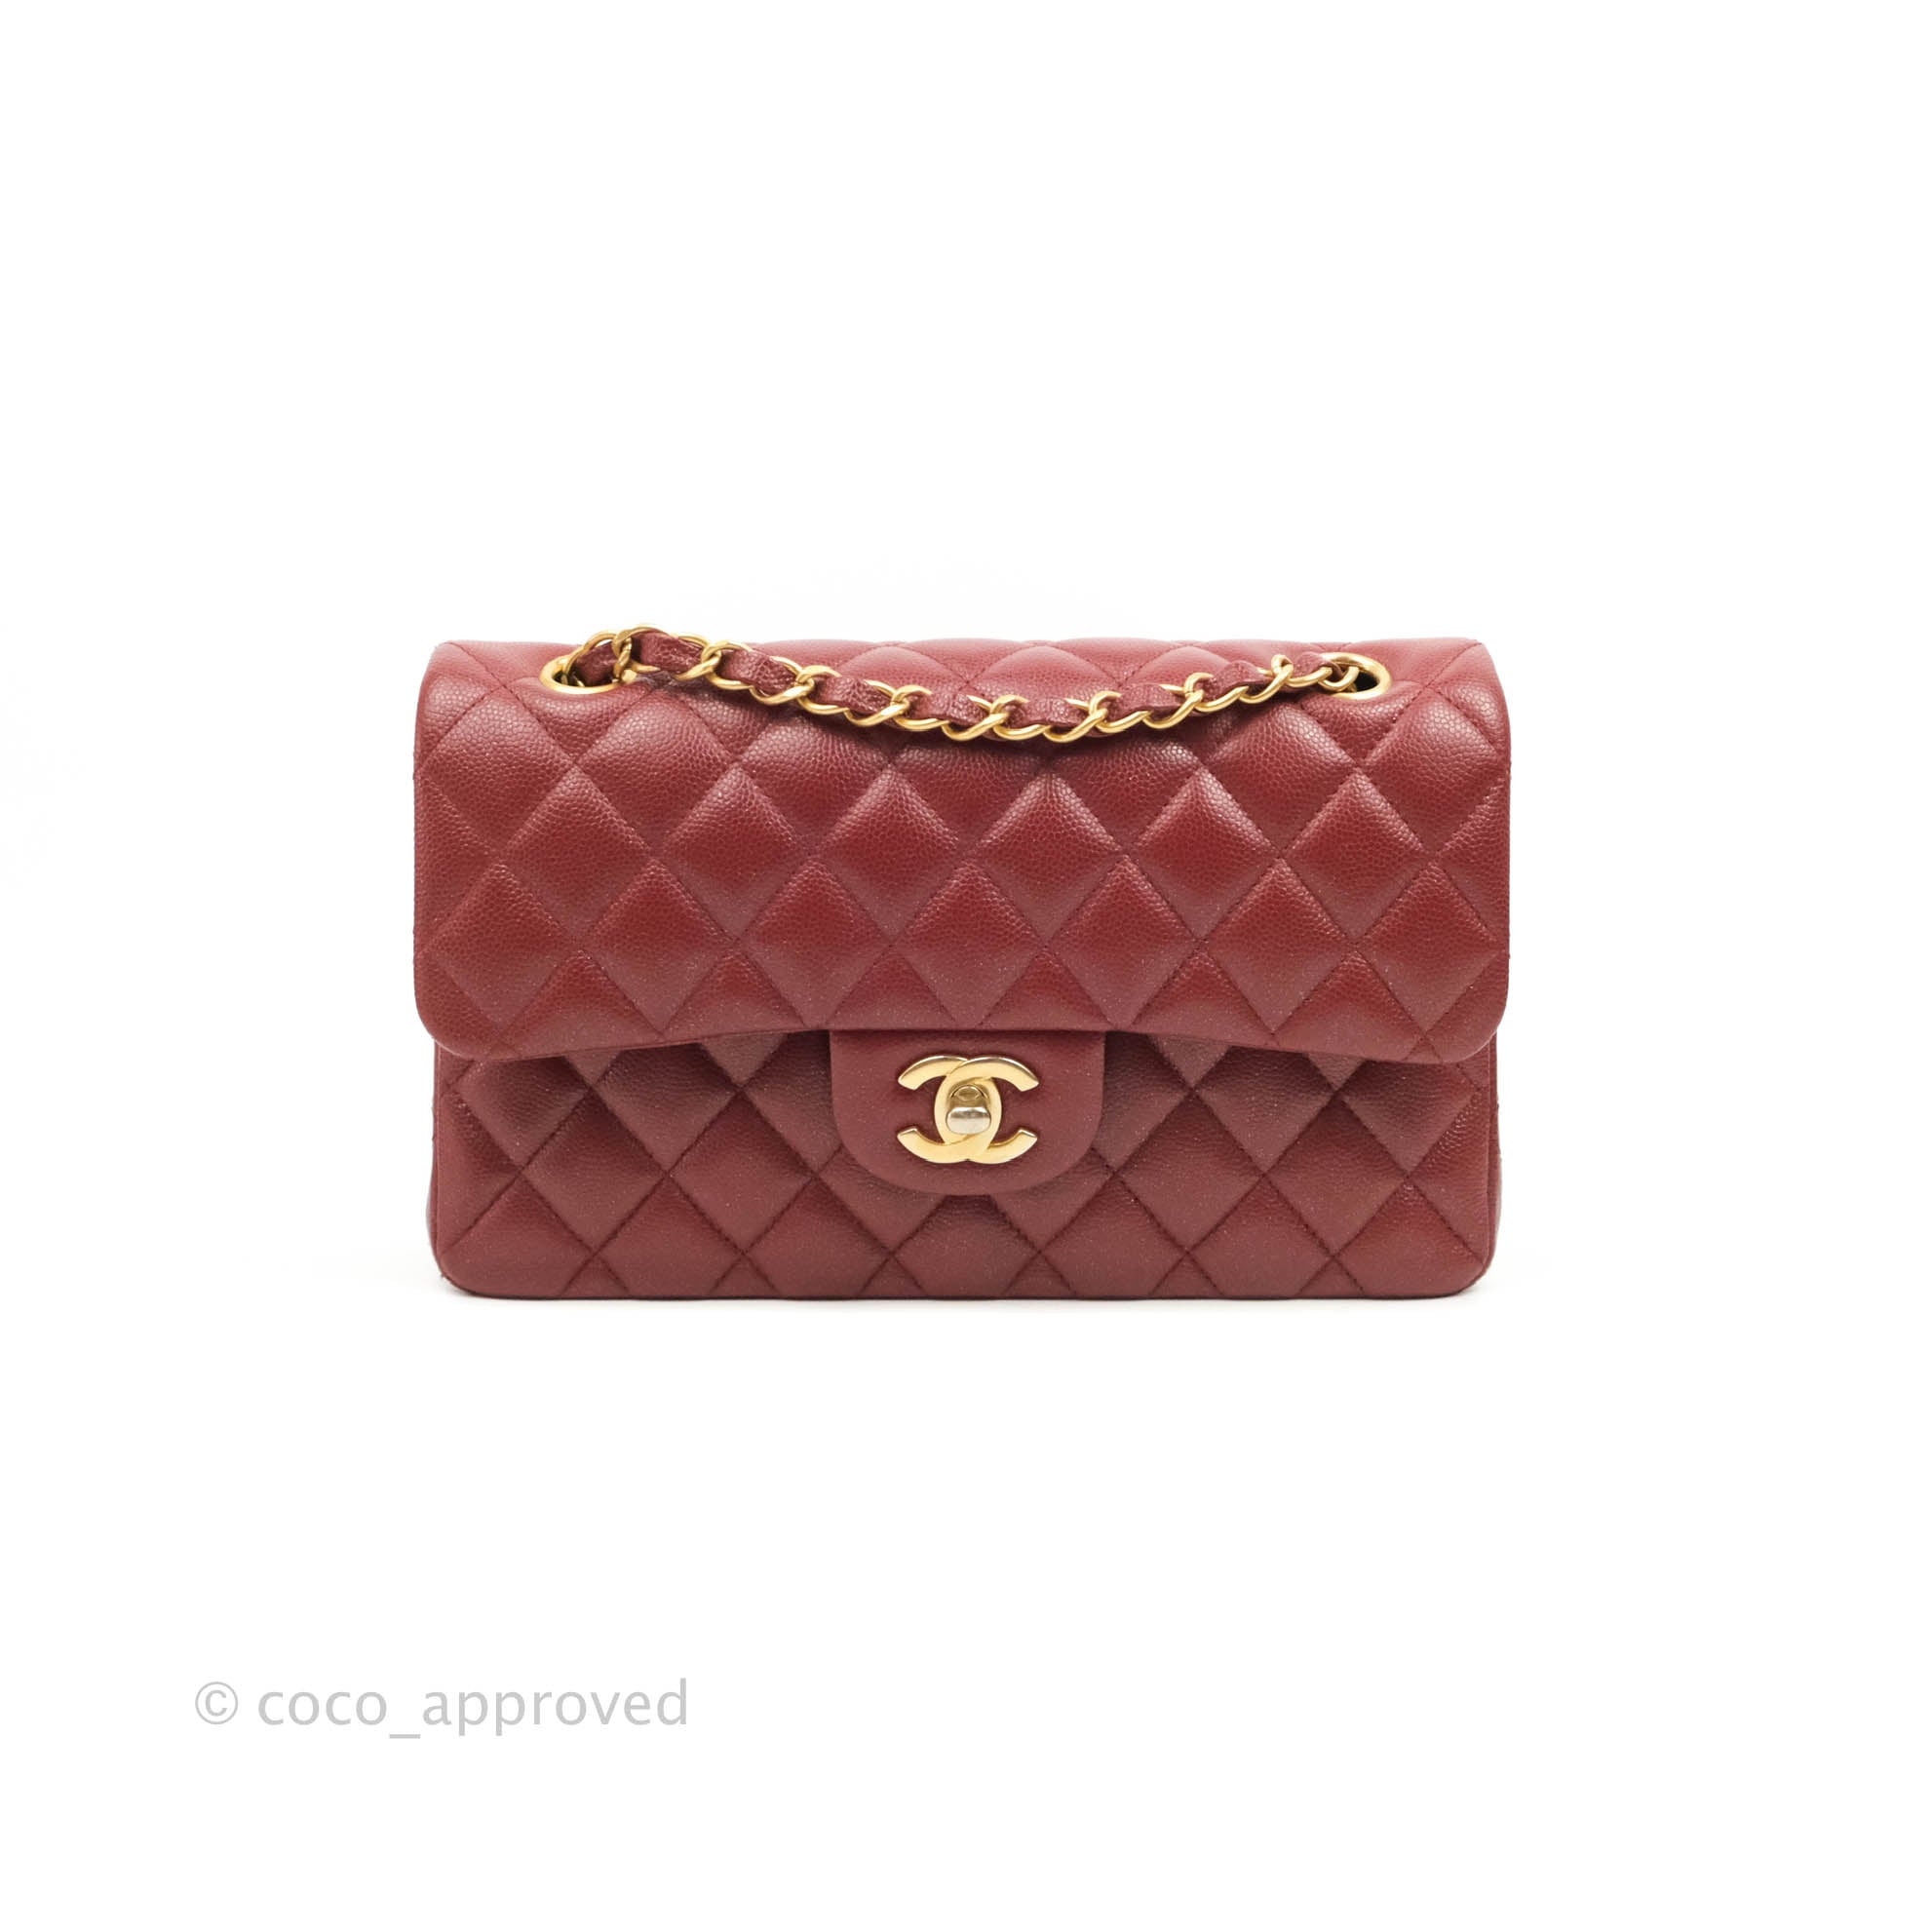 Sold at Auction: Chanel Metallic Gold Quilted Lambskin Classic Flap Bag